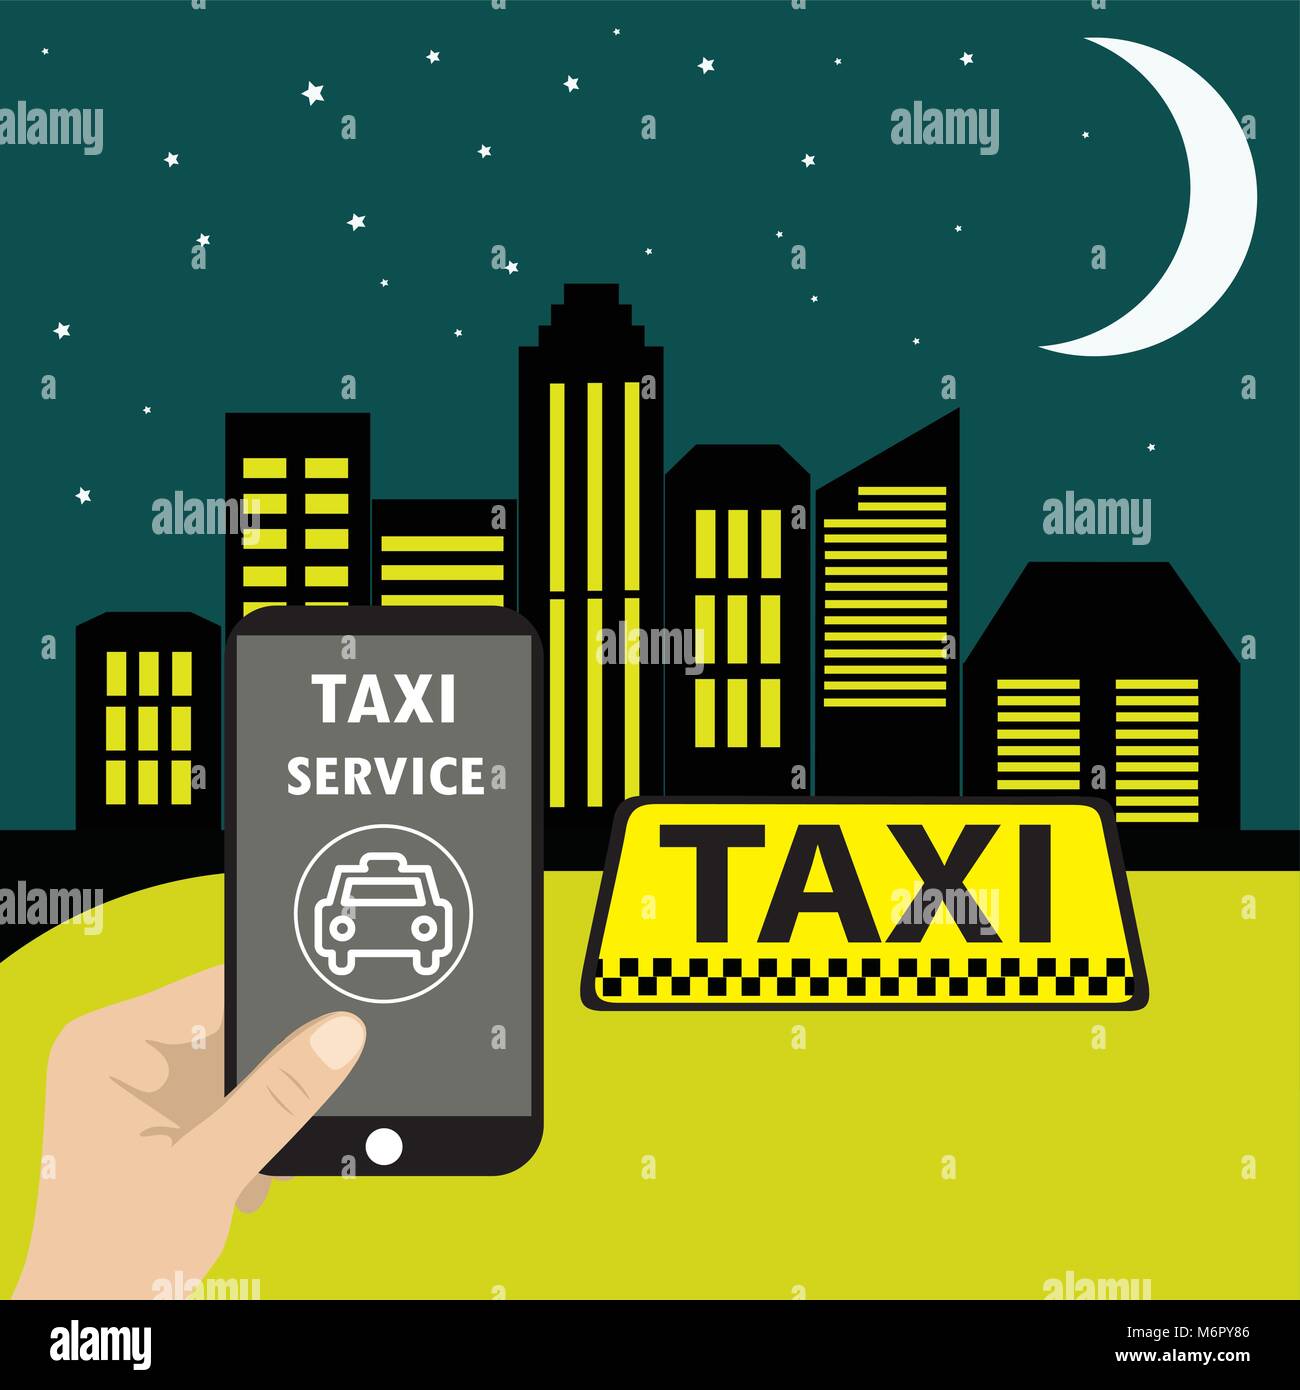 Phone with interface taxi on a screen. Mobile application. Flat vector illustration for business, info graphic, banner, presentations. Stock Vector